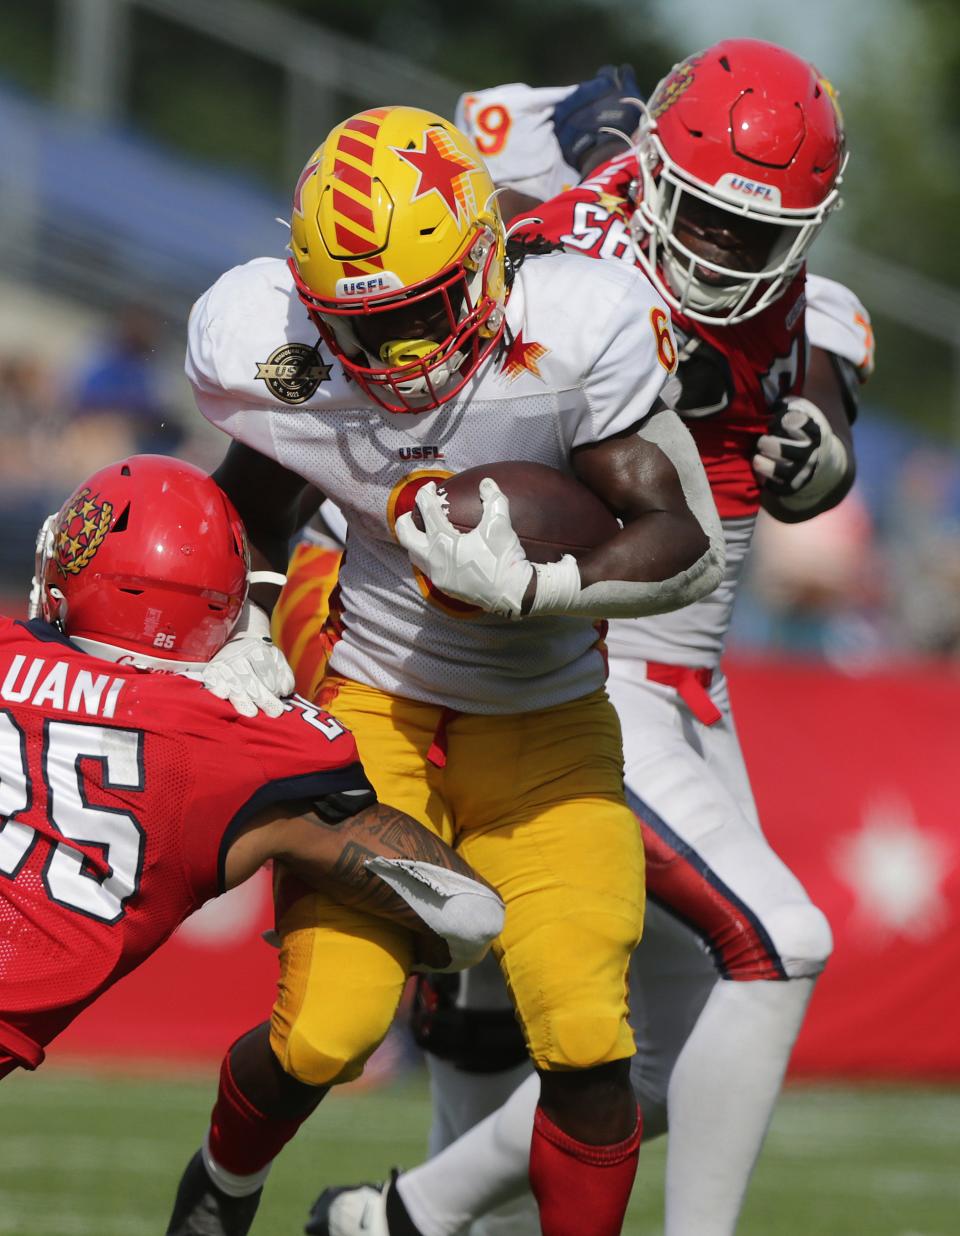 Stars running back Darnell Holland picks up yards during his team's win in a USFL semifinal at Tom Benson Hall of Fame Stadium, Saturday, June 25, 2022.